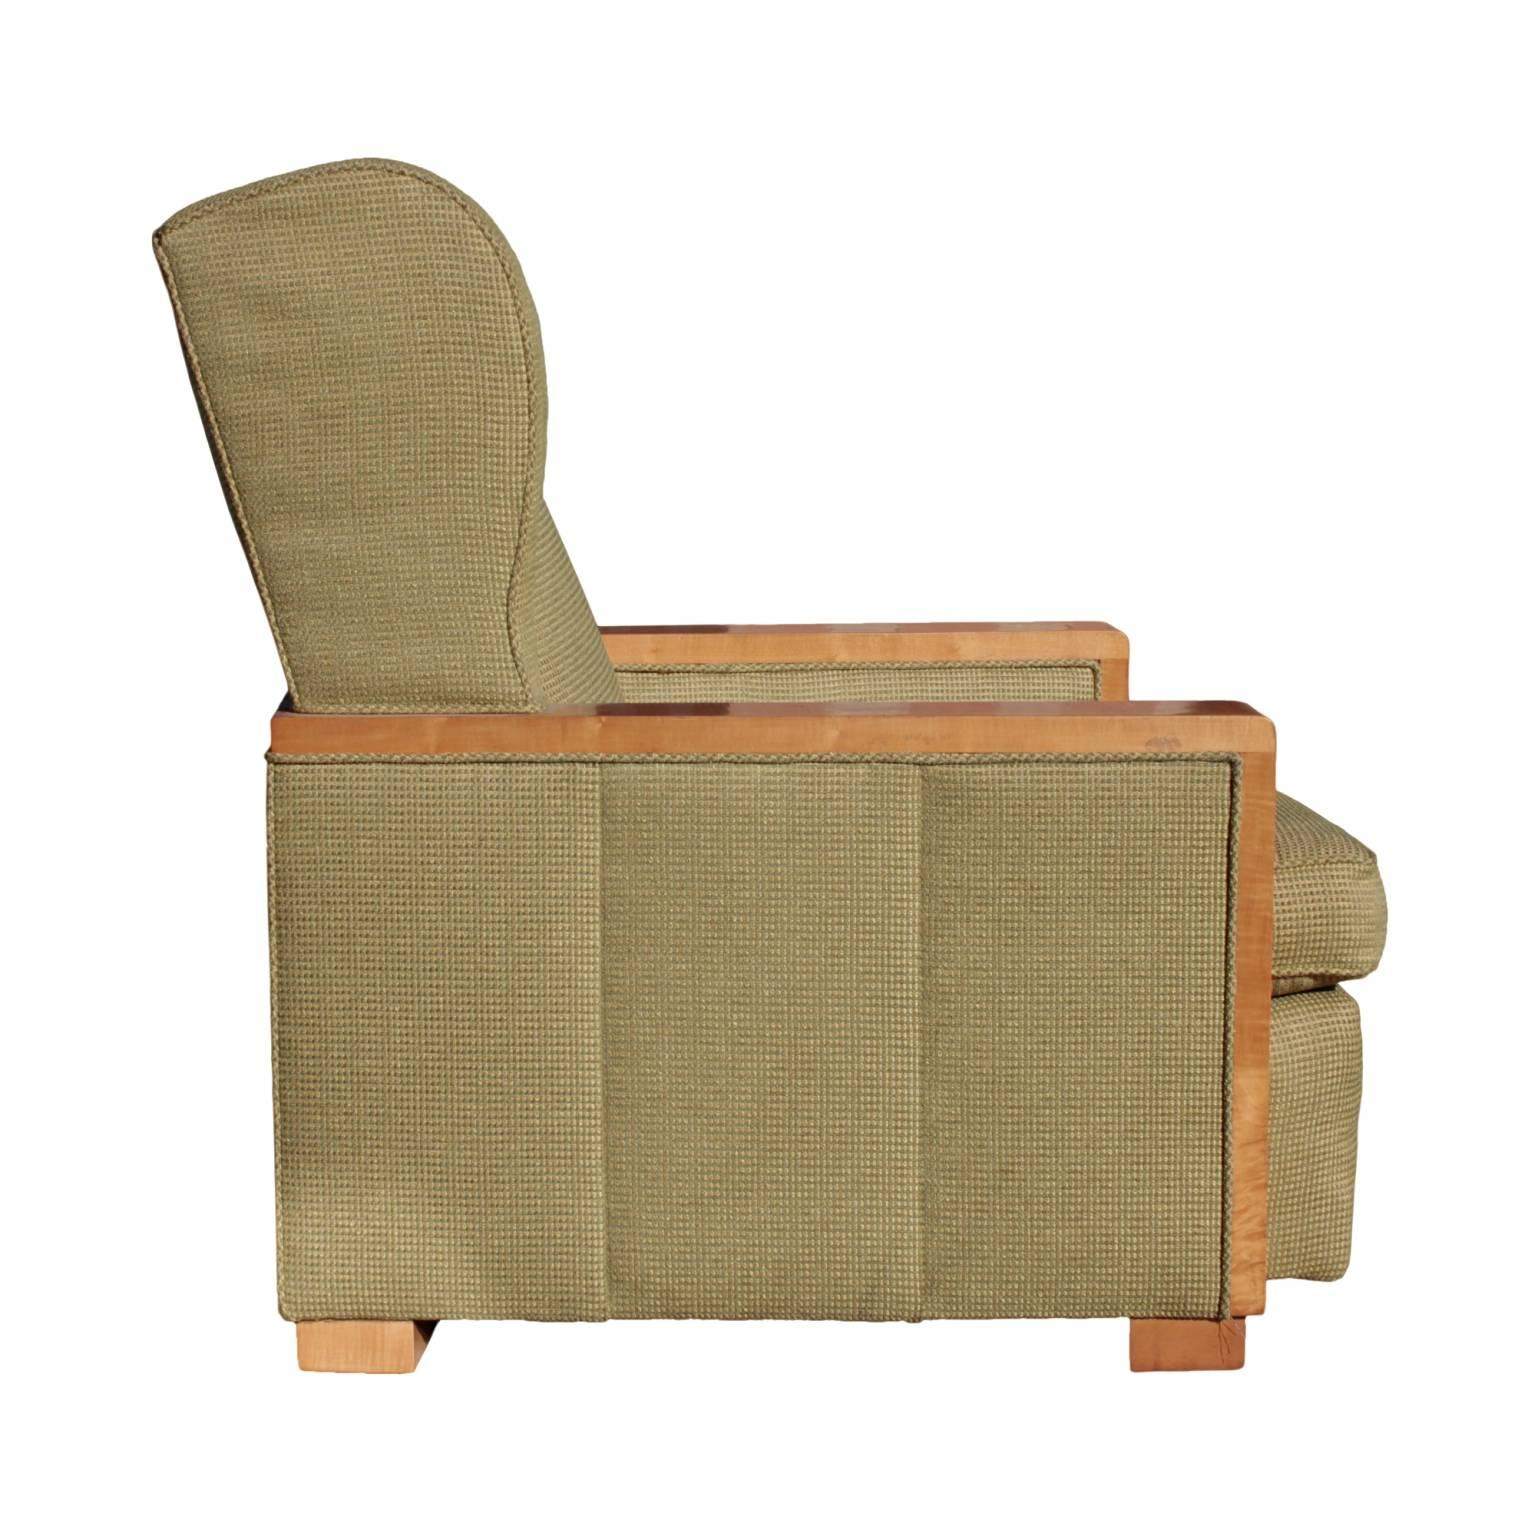 Sculpted, large, solid bergere of cubical design, featuring a box frame in sycamore which wraps around a fully upholstered, winged backrest angled for comfort. Protruding box seat with pillow insert. Resting on block feet in sycamore. 

The chair